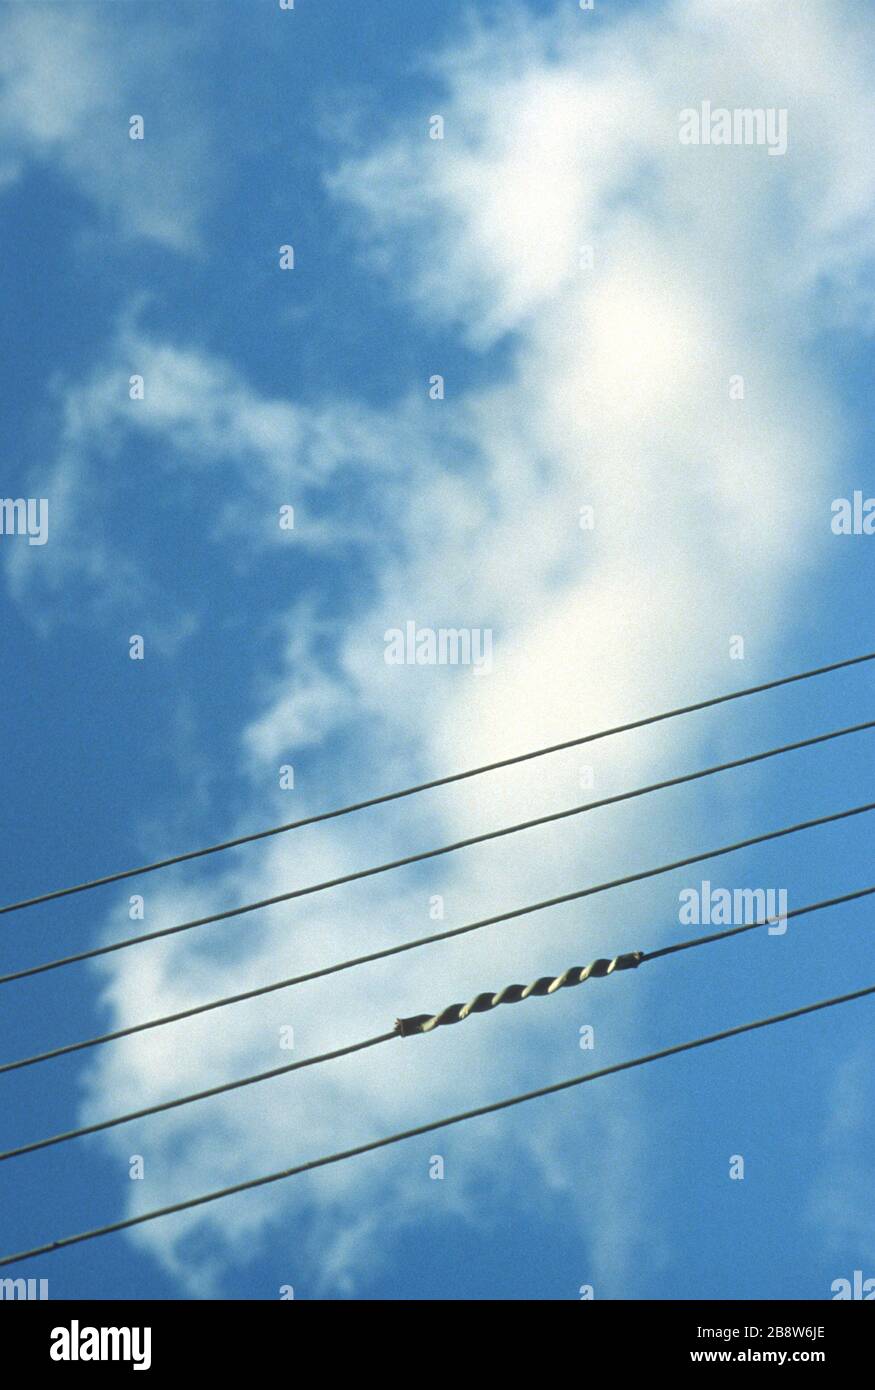 Five phone / electricity / telegraph wires isolated against a blue sky look like music staves. Put your own notes on the background. Stock Photo